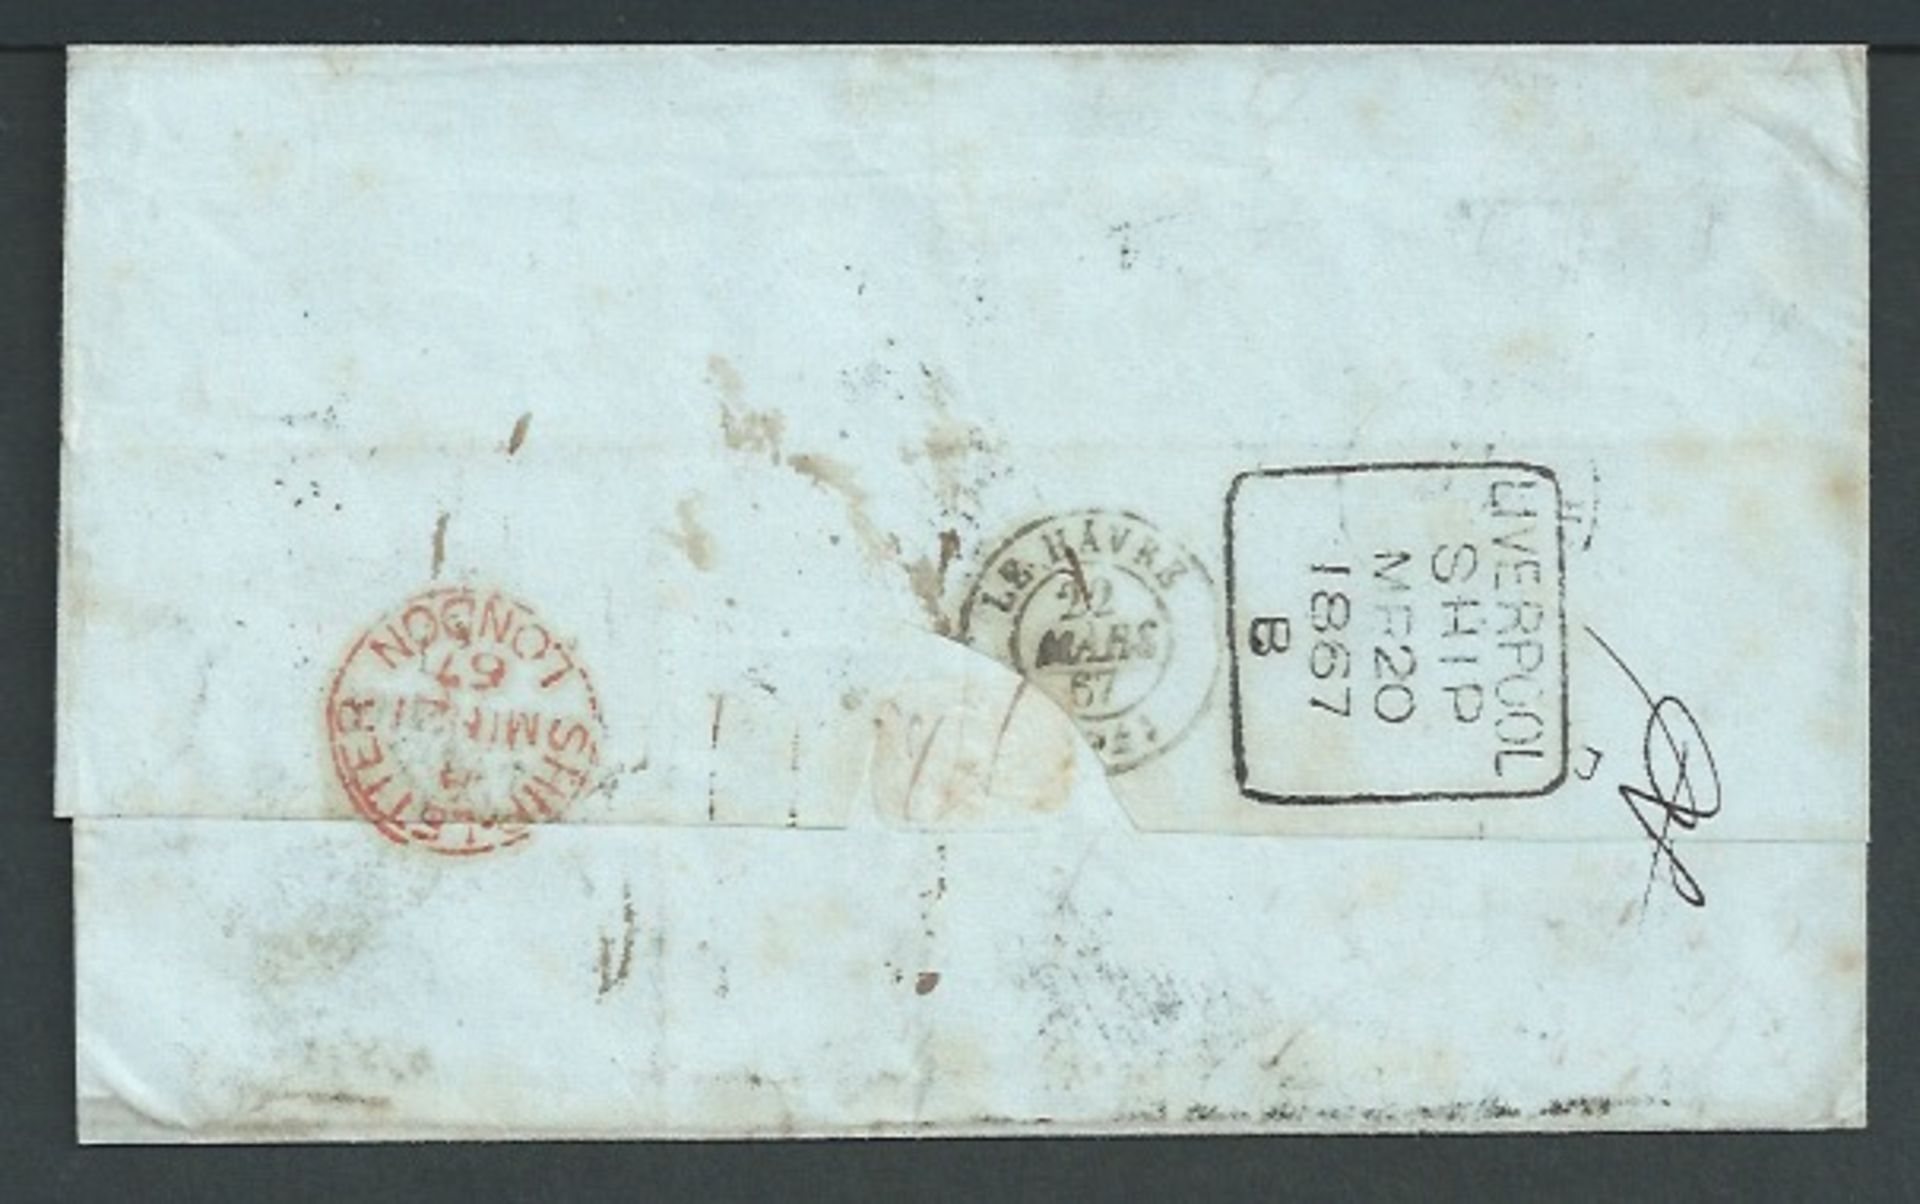 Accountant Marks / Madeira 1867 Entire from Maderia to France via England, with datestamps of "FUNCH - Image 2 of 4